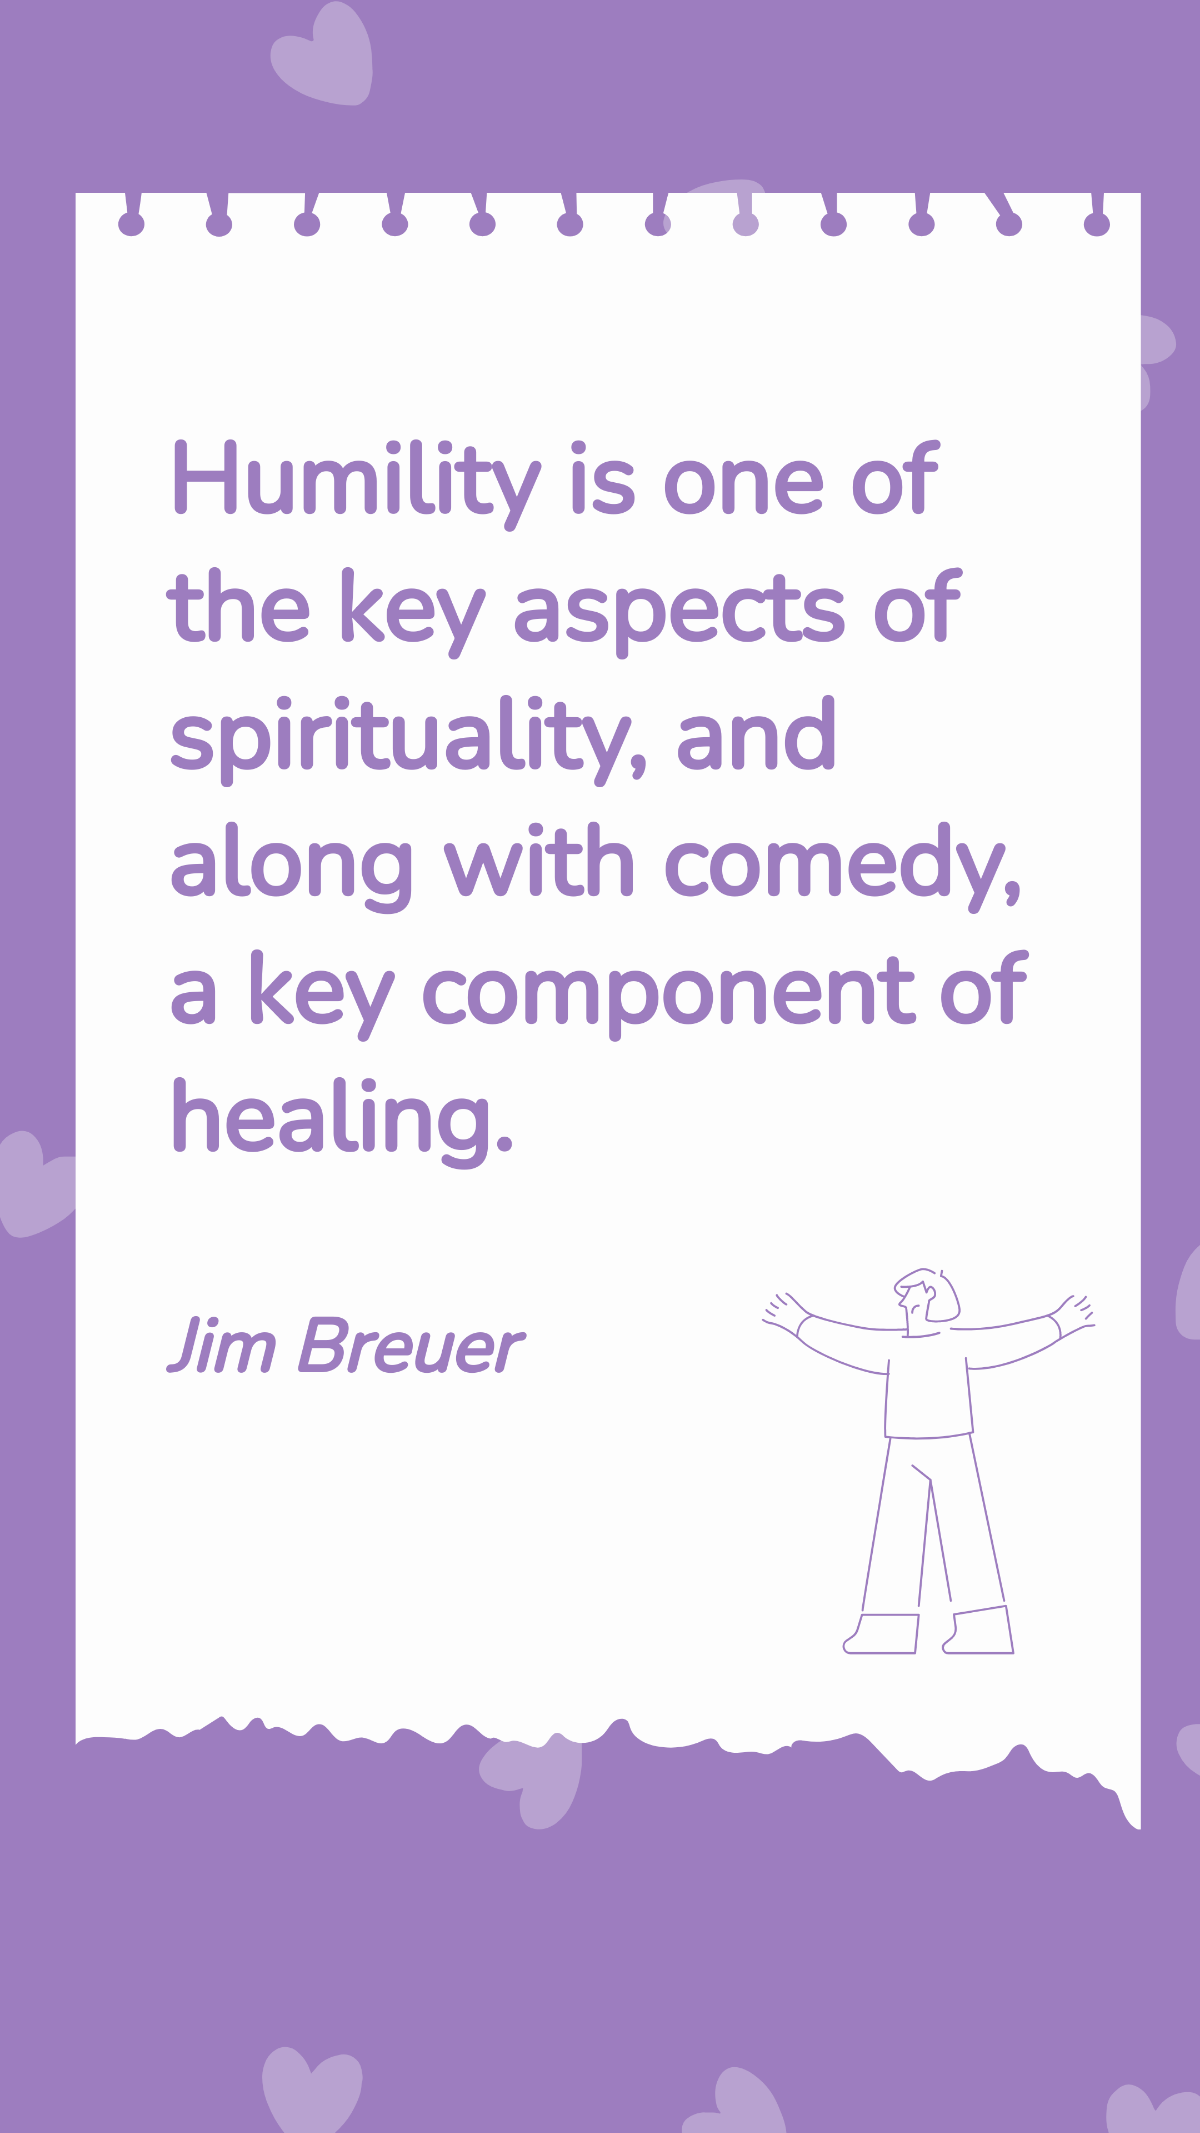 Free Jim Breuer - Humility is one of the key aspects of spirituality, and along with comedy, a key component of healing. Template